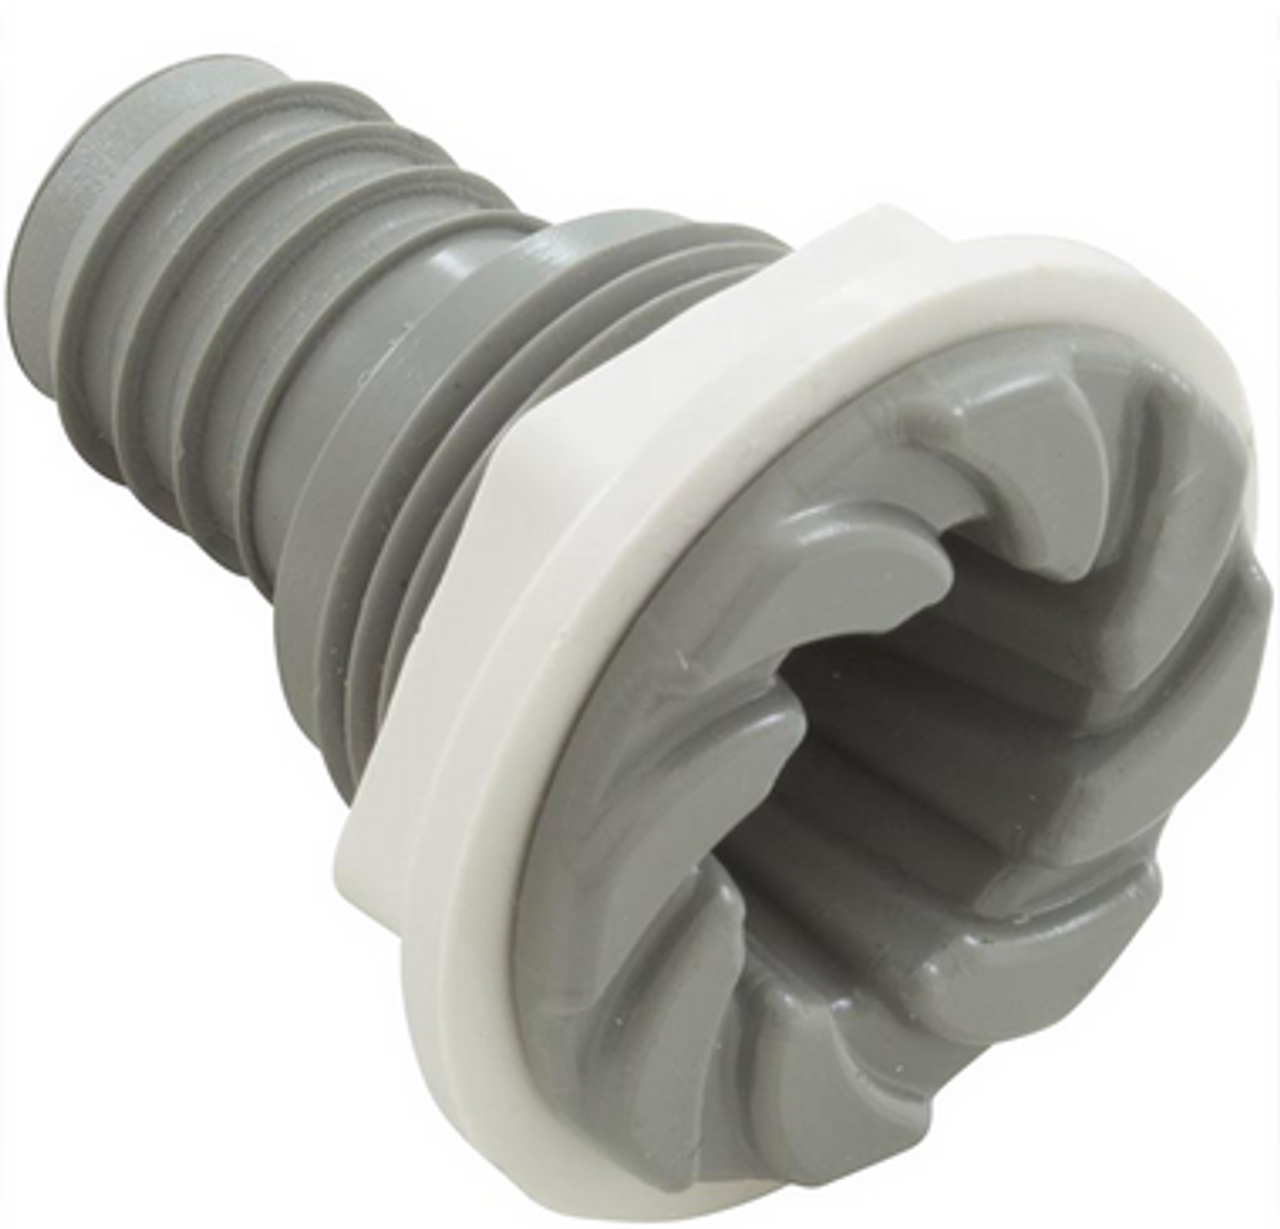 1 5/8" Face, Jet Assembly, Waterway, Ozone, Swirl Face, 1 1/4 to 1 1/2" Hole Size, 3/4" Barb, Gray